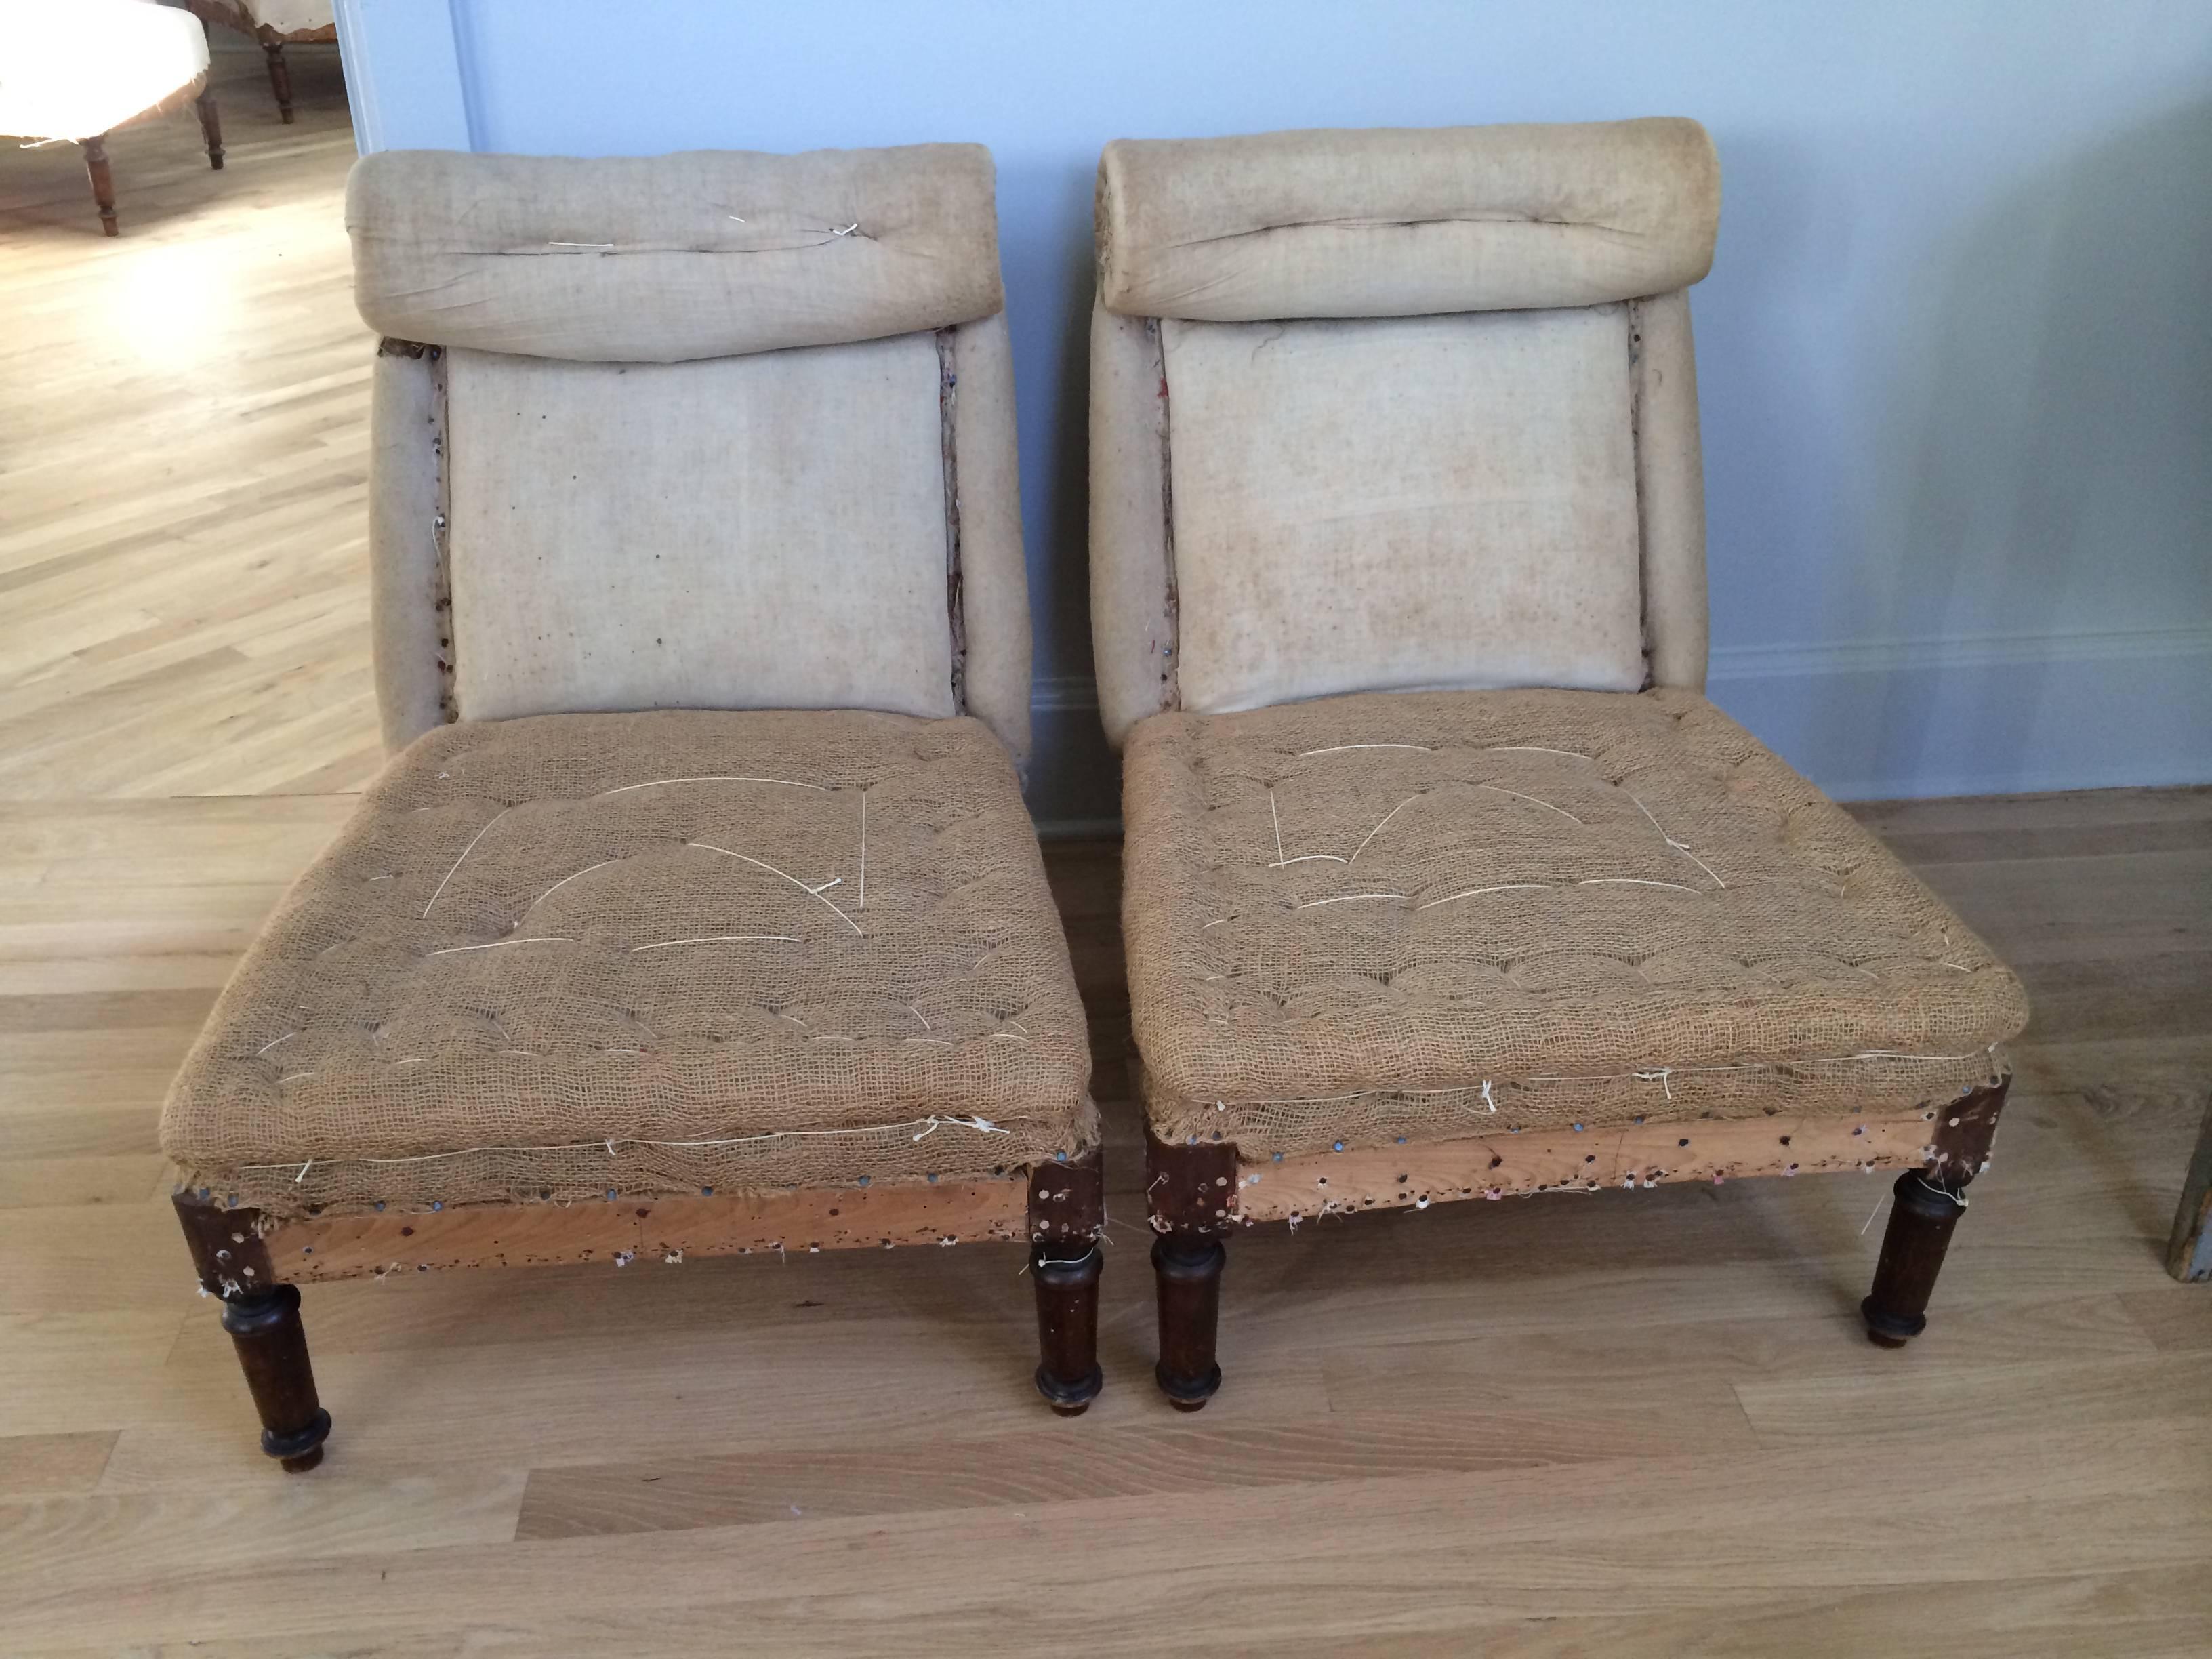 Lovely pair of 19th century French scroll back slipper chairs in original condition